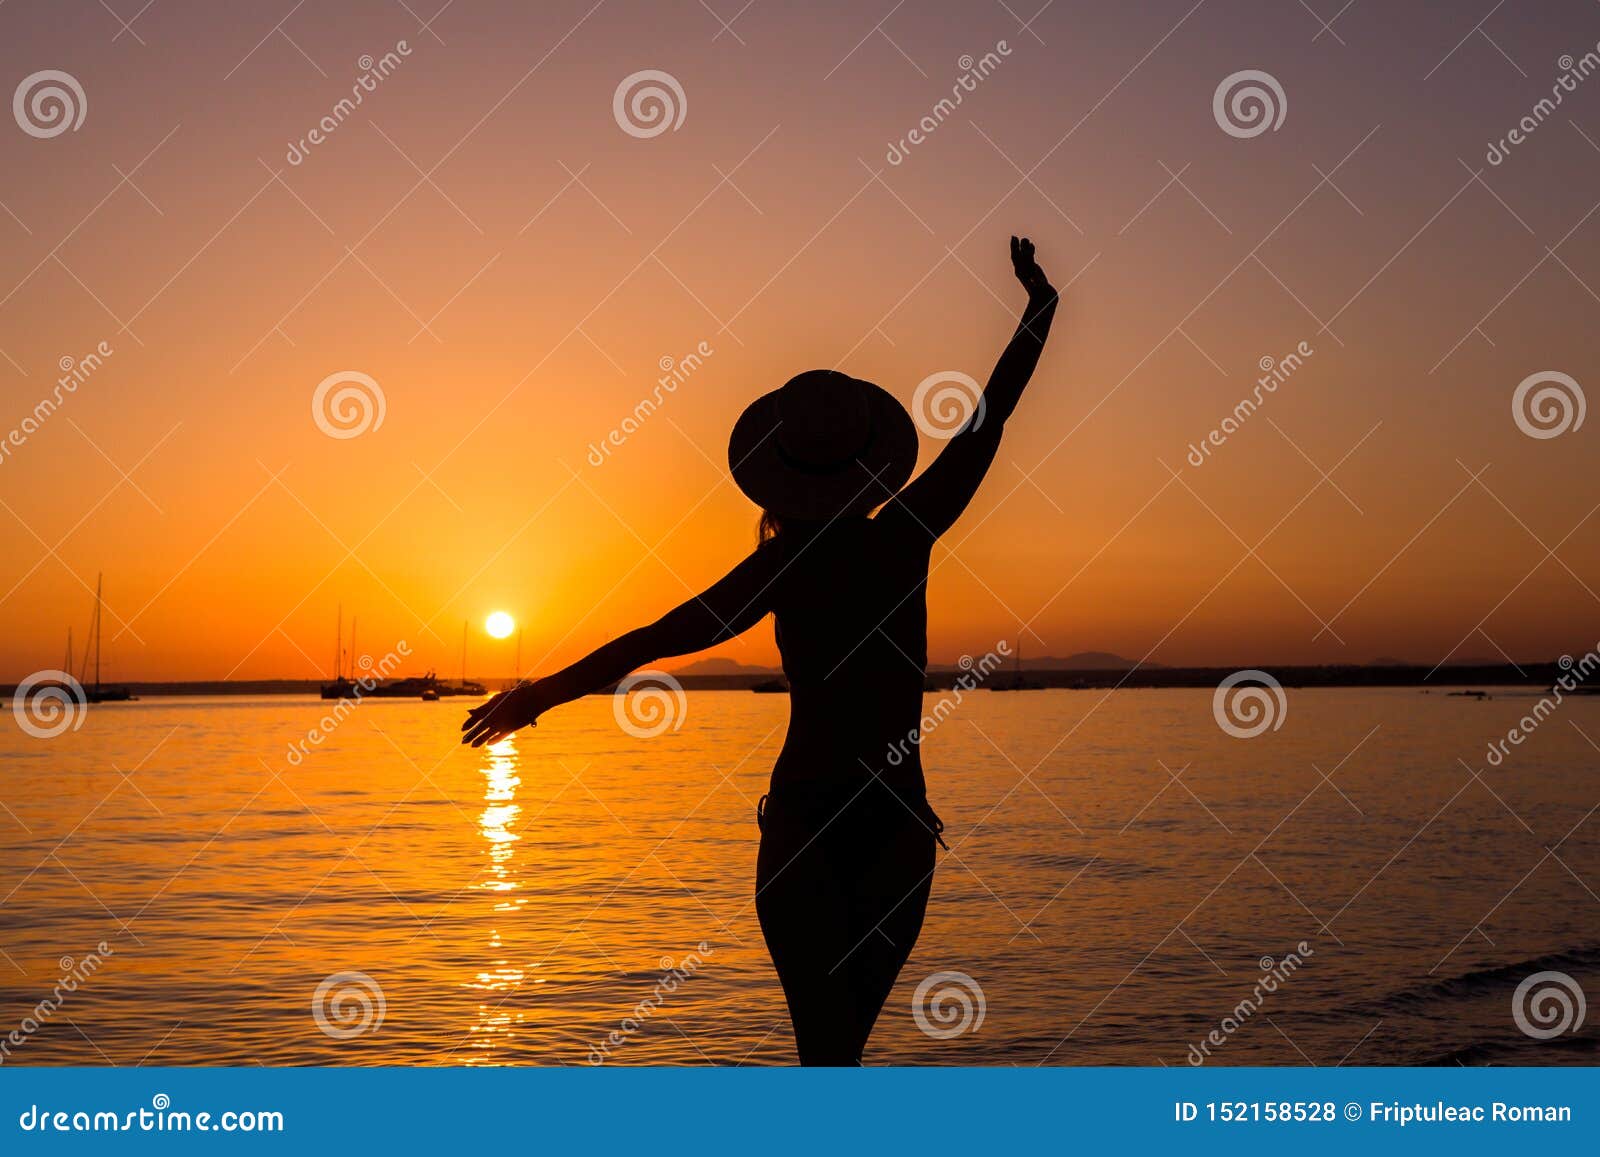 Sunset Woman Silhouette Carefree Woman Enjoying The Sunset On The